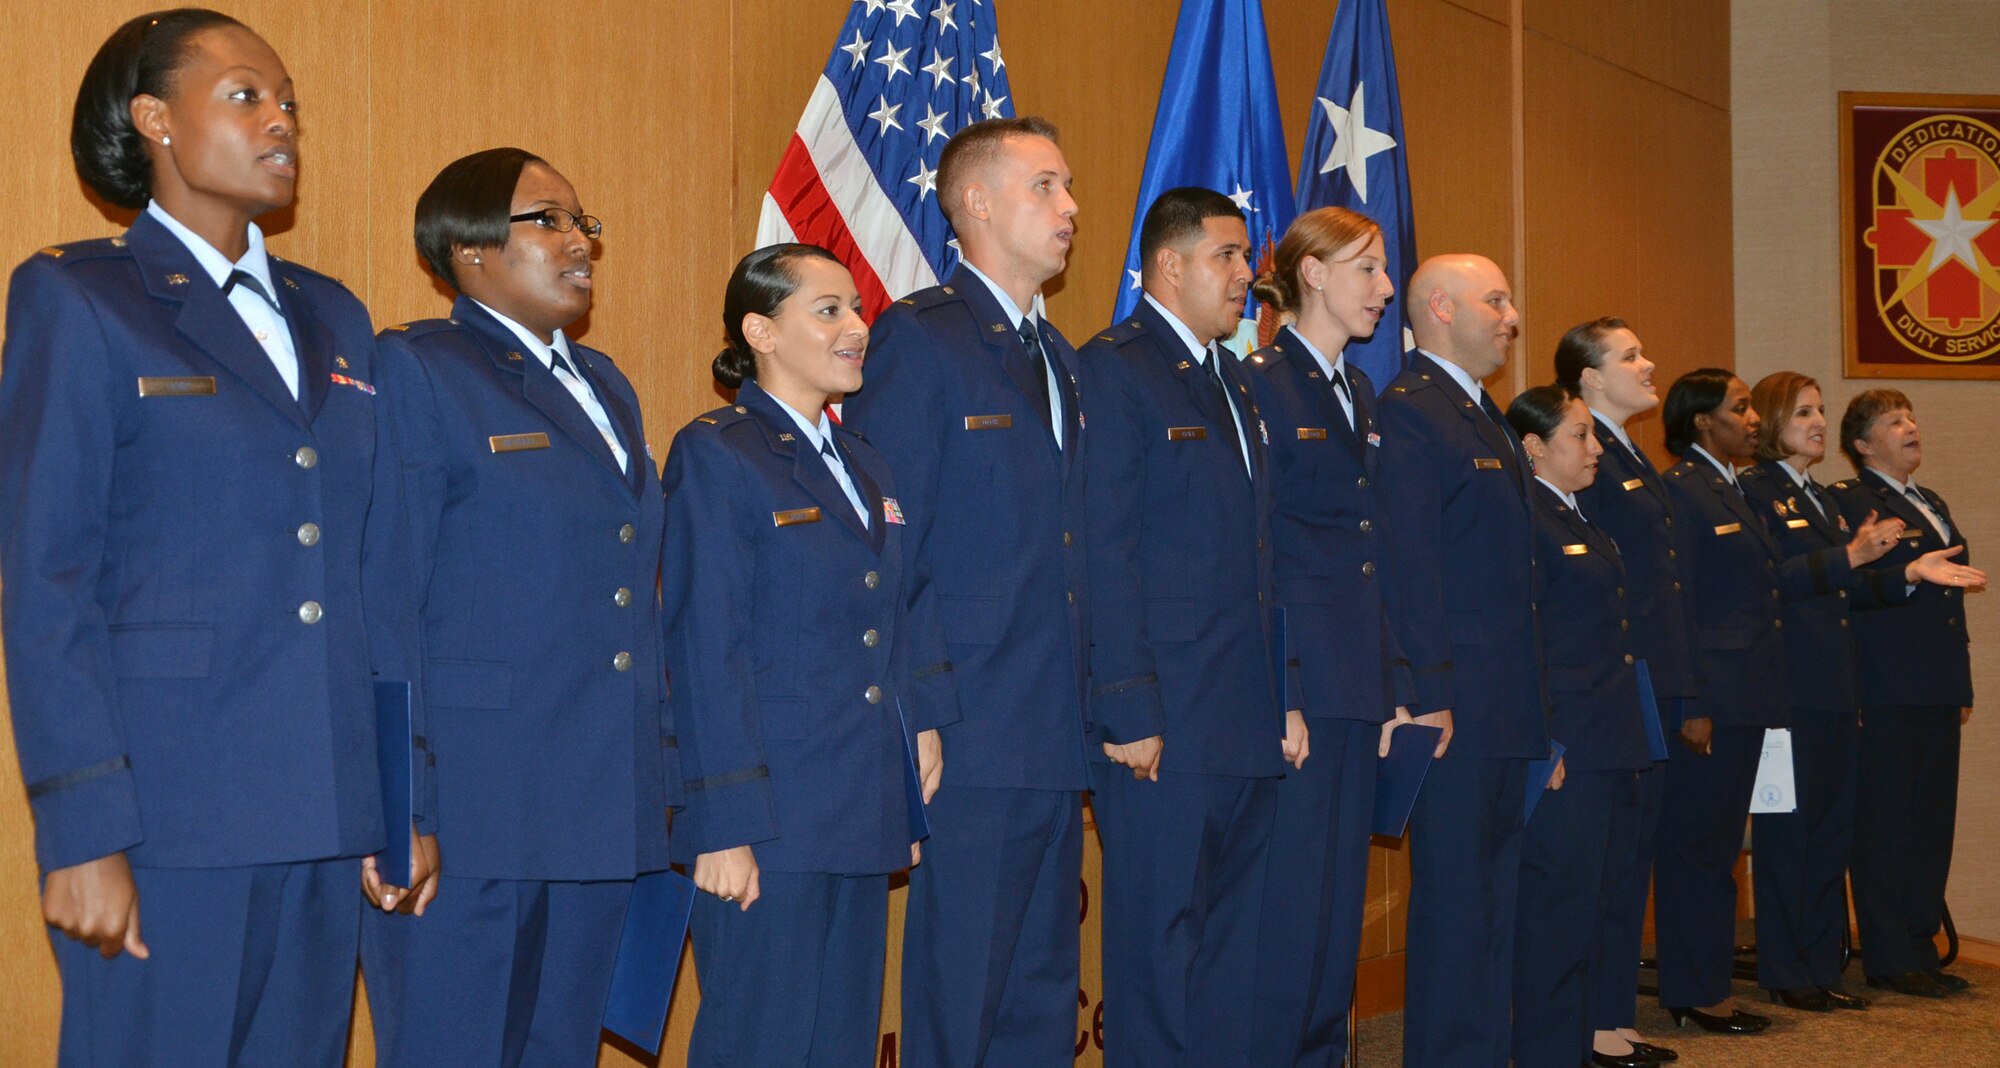 The first class of 12 Air Force nursing residents participate in a graduation ceremony Aug. 20 at the San Antonio Military Medical Center. (Photo by Lori Newman, JBSA-Fort Sam Houston Public Affairs)